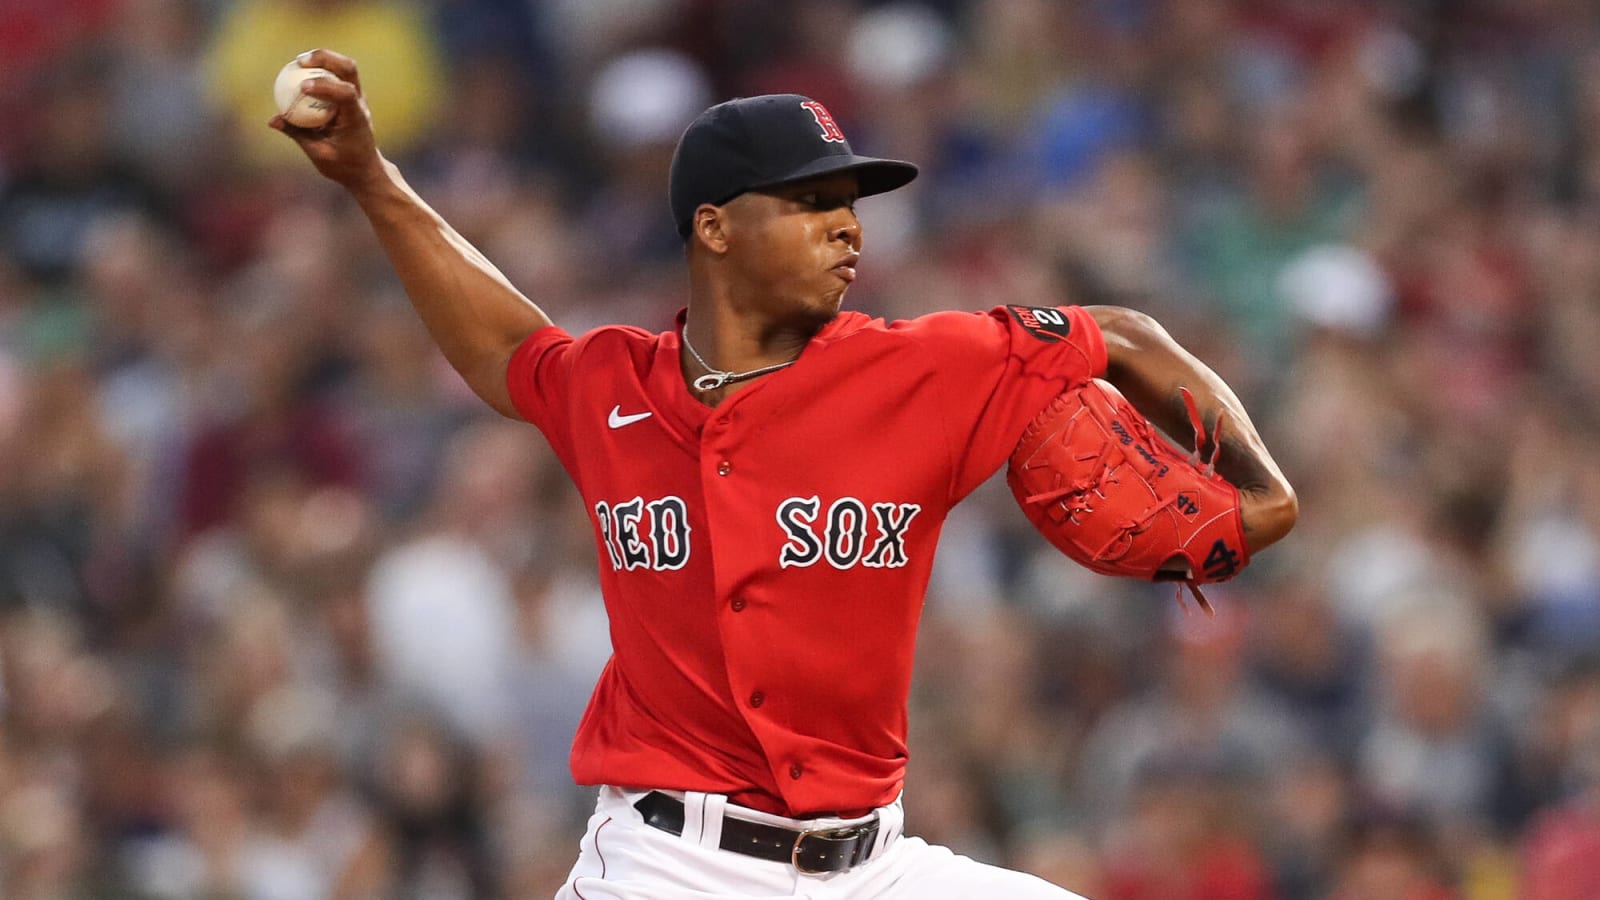 Brayan Bello runs out of gas in fifth inning as Red Sox drop opener to Twins, 4-2